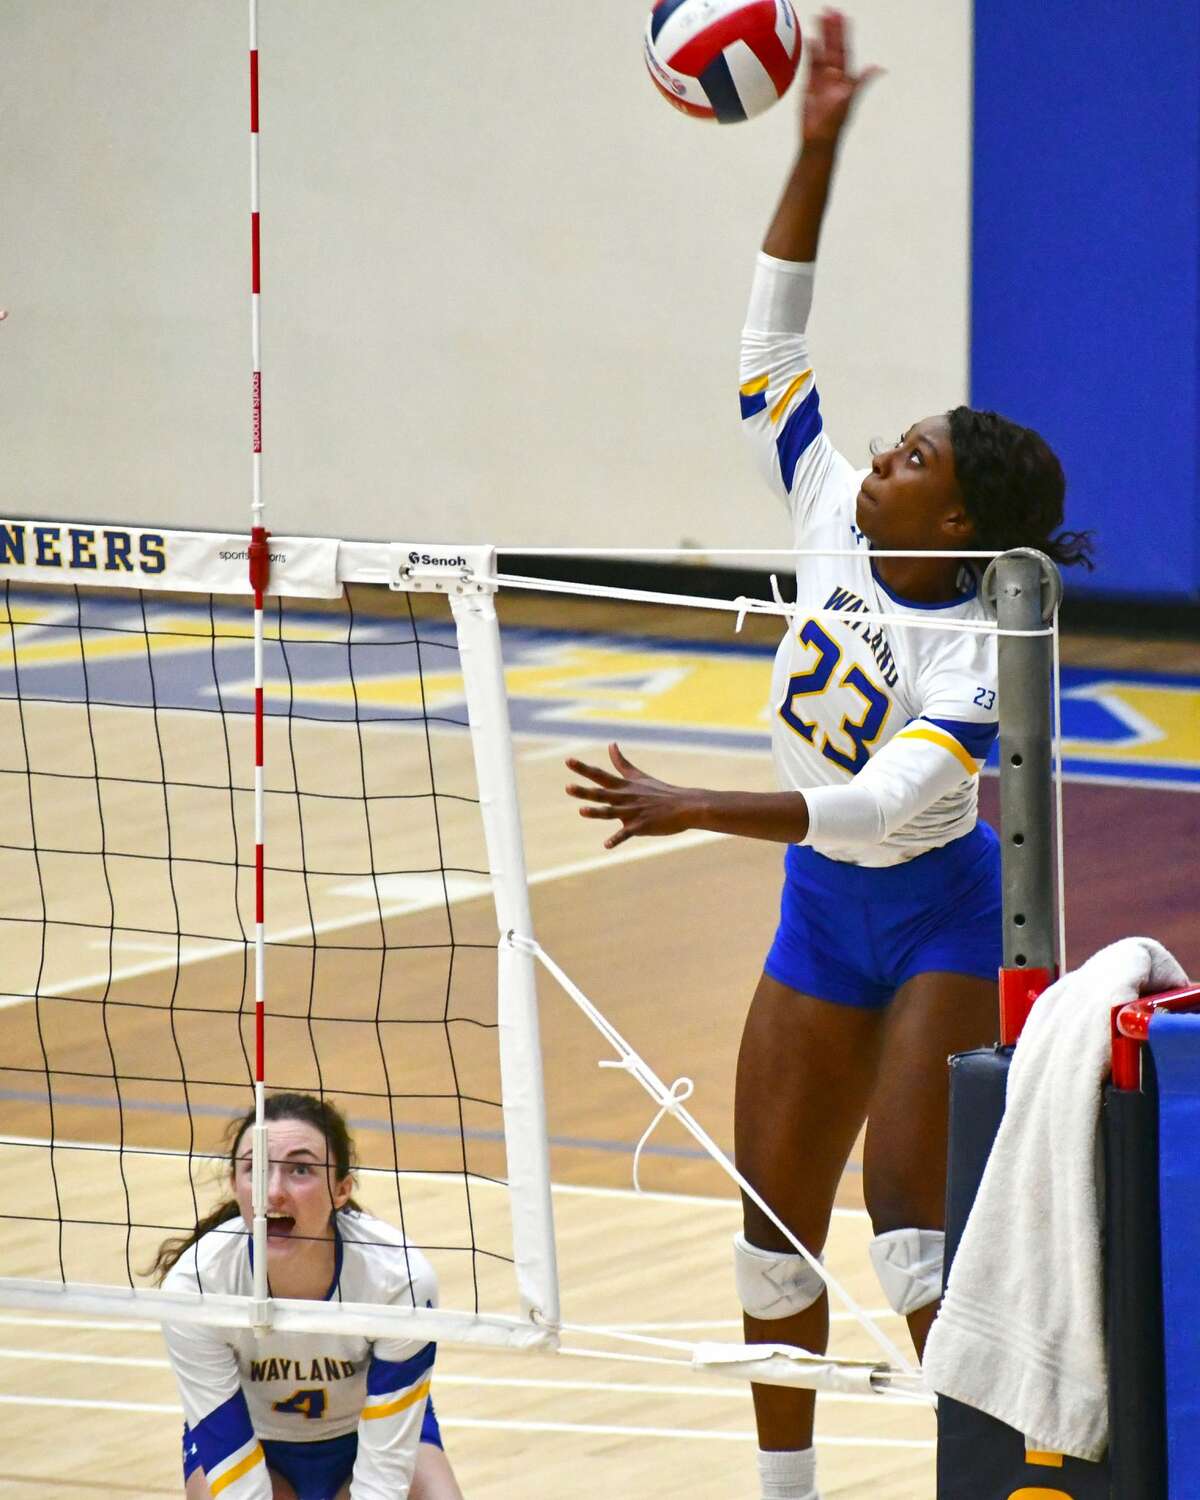 Wayland Baptist hosted Lubbock Christian in a non-conference volleyball game on Tuesday in the Hutcherson Center. 